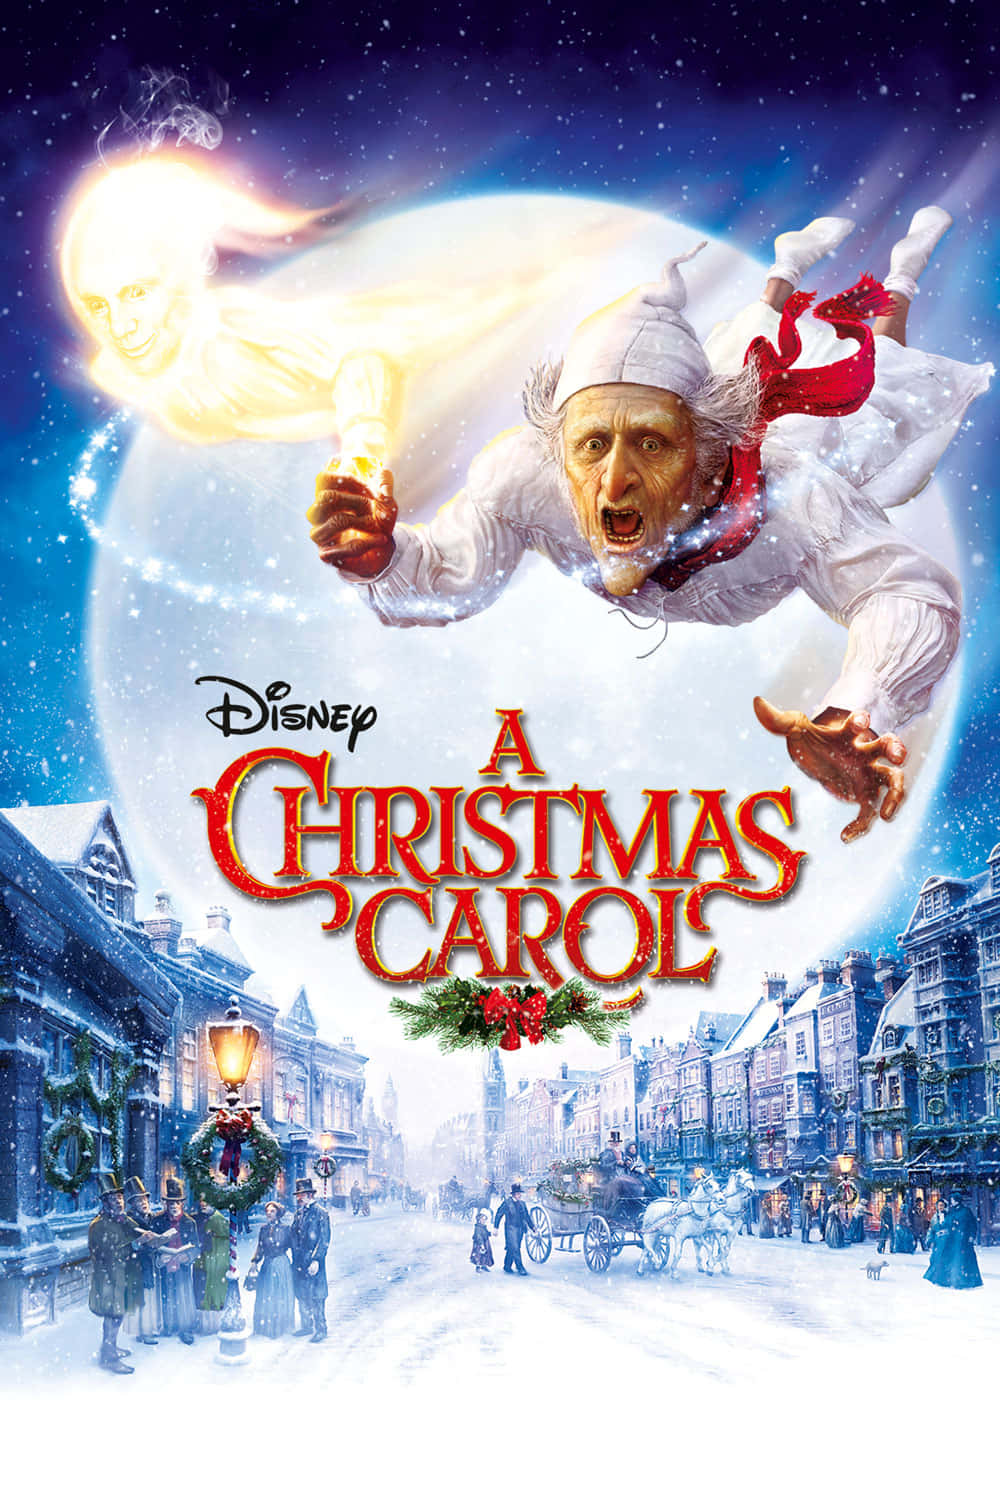 The Ghosts of Christmas in A Christmas Carol